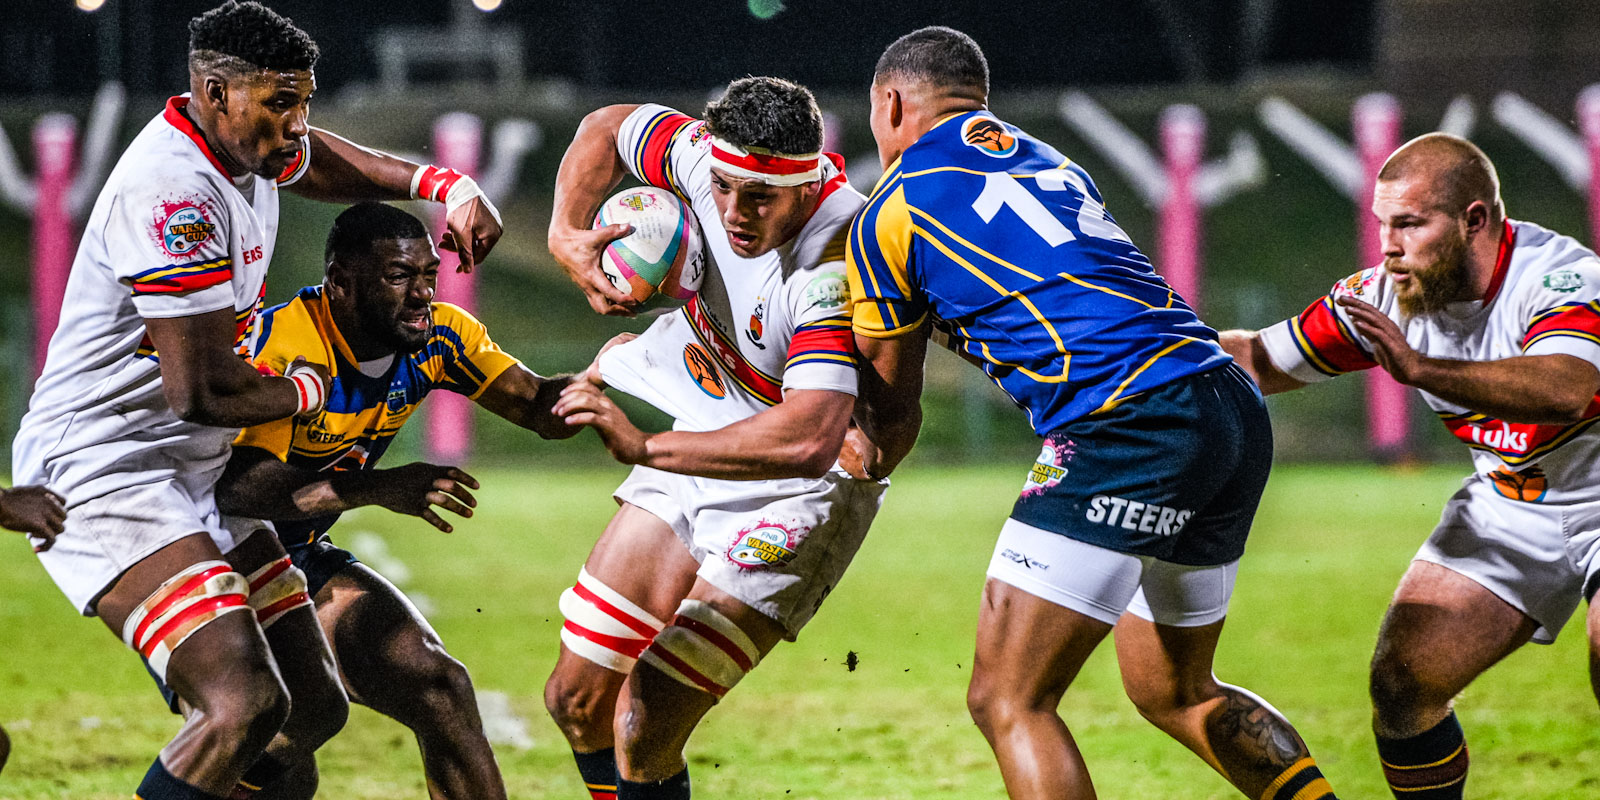 Tuks had to fight off a determined UWC late in their match in Pretoria on Monday night.